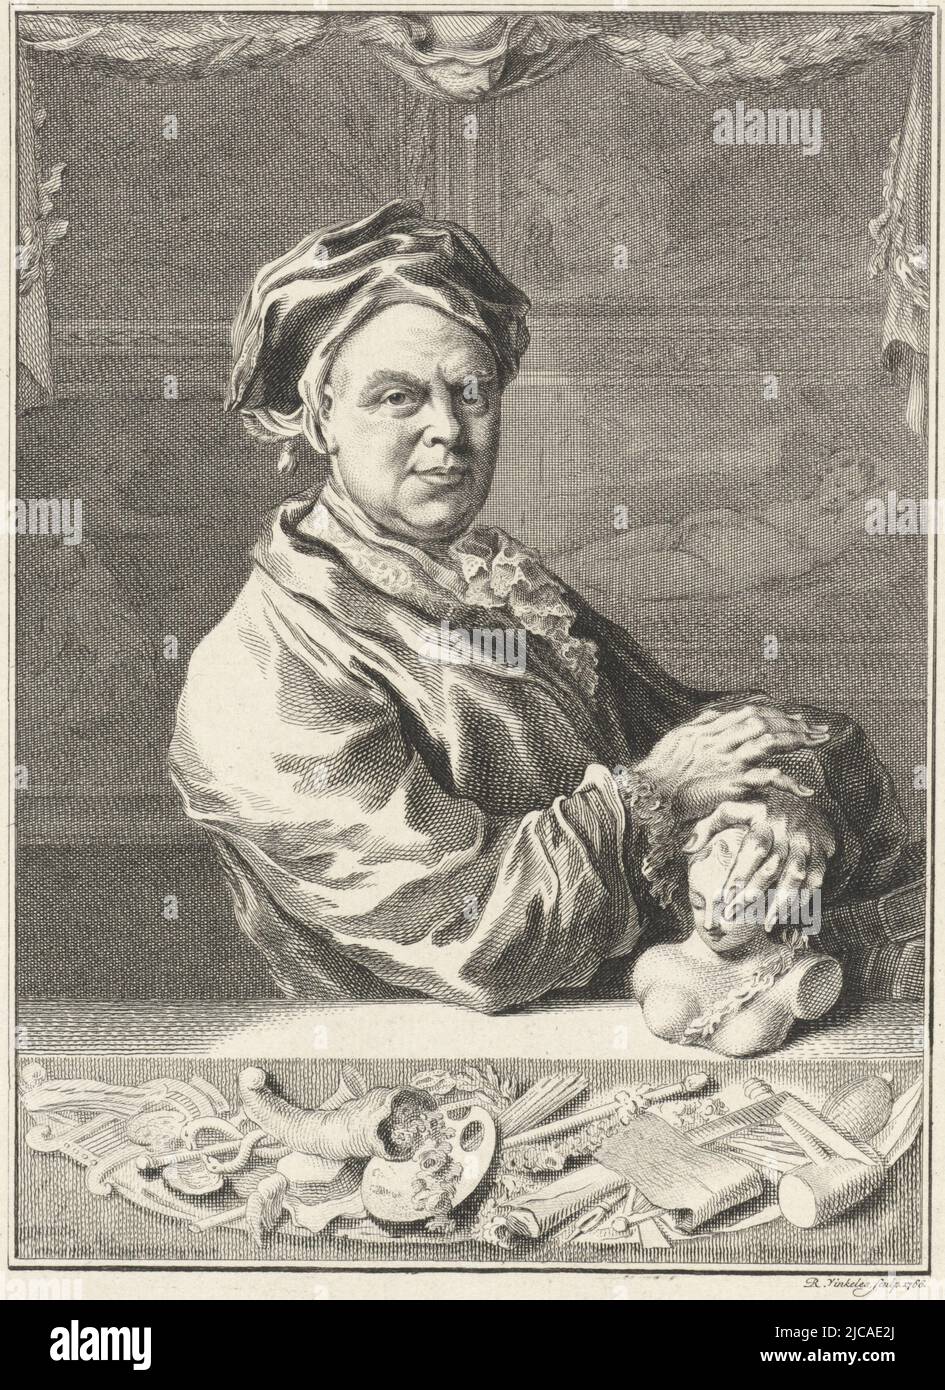 Portrait of Amsterdam art lover Gerrit Braamcamp, Portrait of Gerrit Braamcamp, print maker: Reinier Vinkeles (I), (mentioned on object), intermediary draughtsman: Jacob Xavery, Amsterdam, 1766, paper, etching, engraving, h 213 mm × w 153 mm Stock Photo